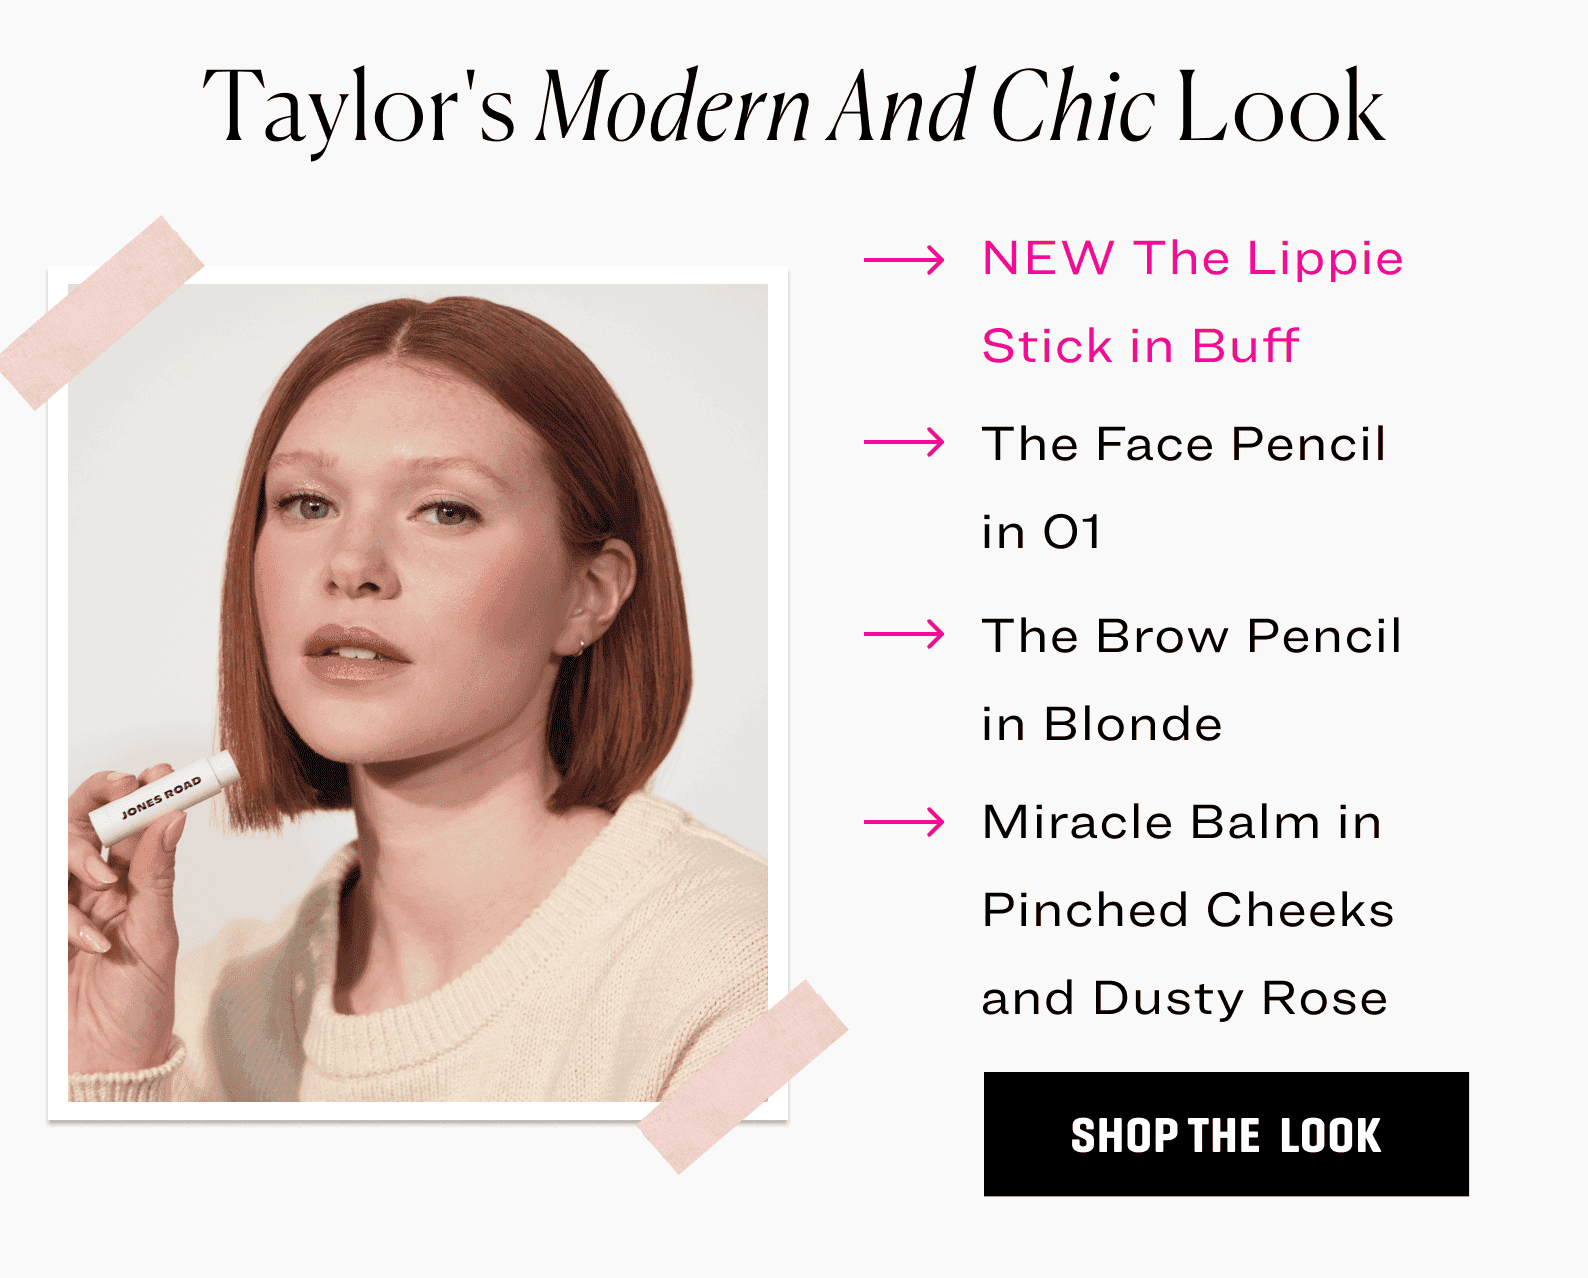 Taylor's Modern And Chic Loook